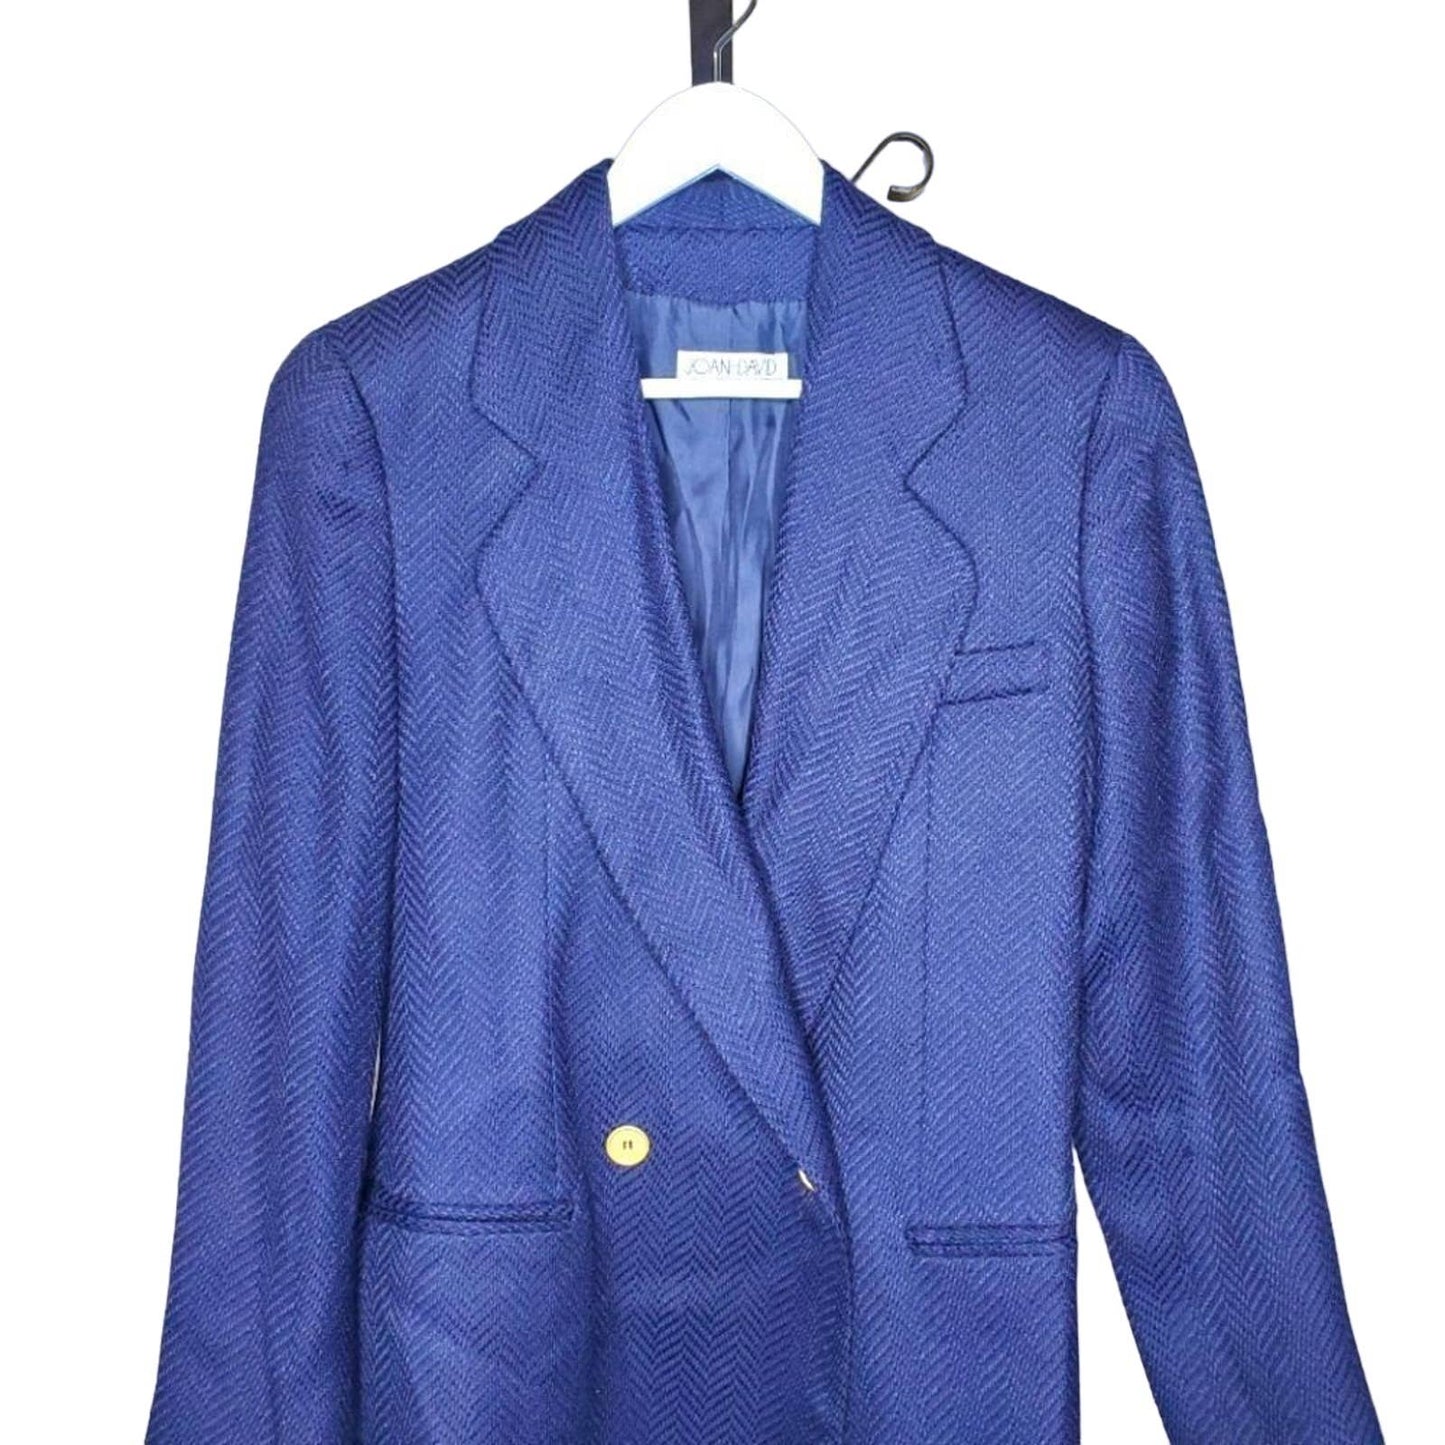 Joan & David Navy Blue Two Button Blazer, Made in Italy, Size 8